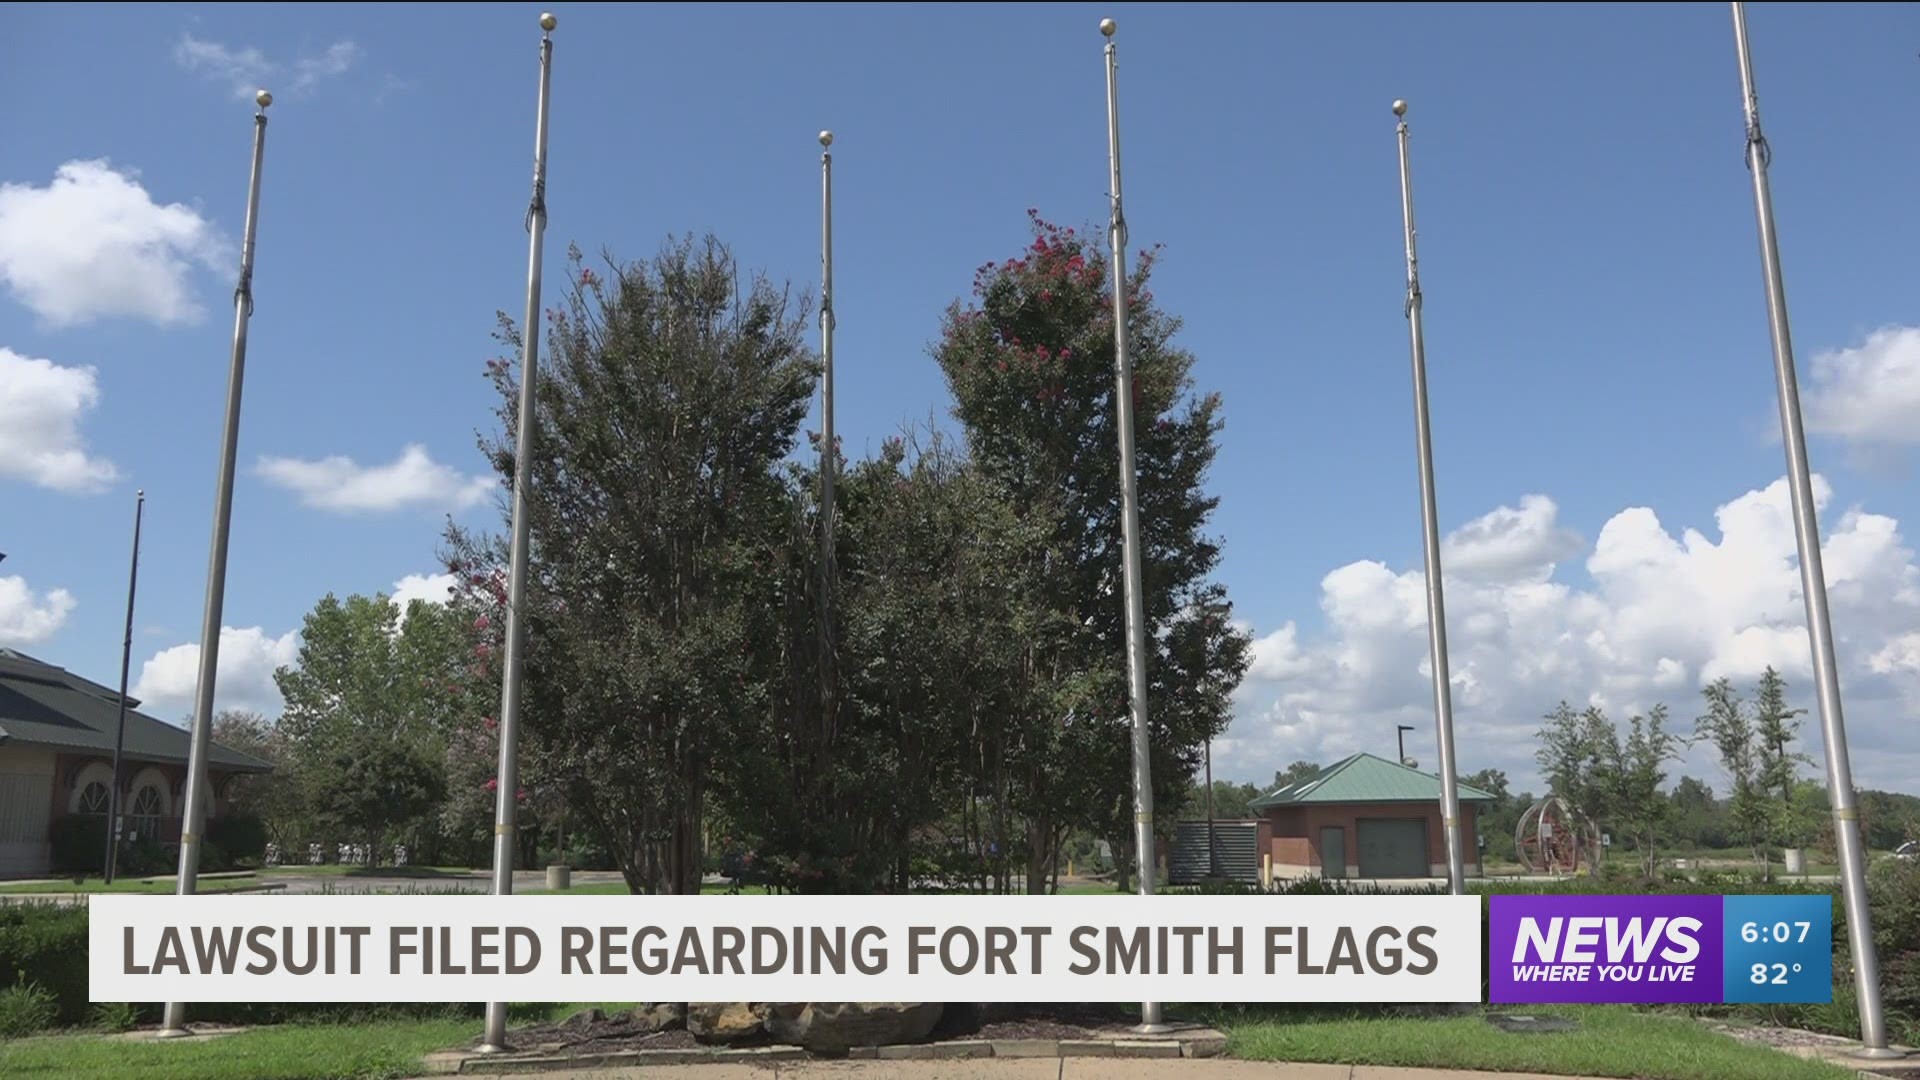 A lawsuit has been filed over the removal of the historical flag display in the Riverfront Park.